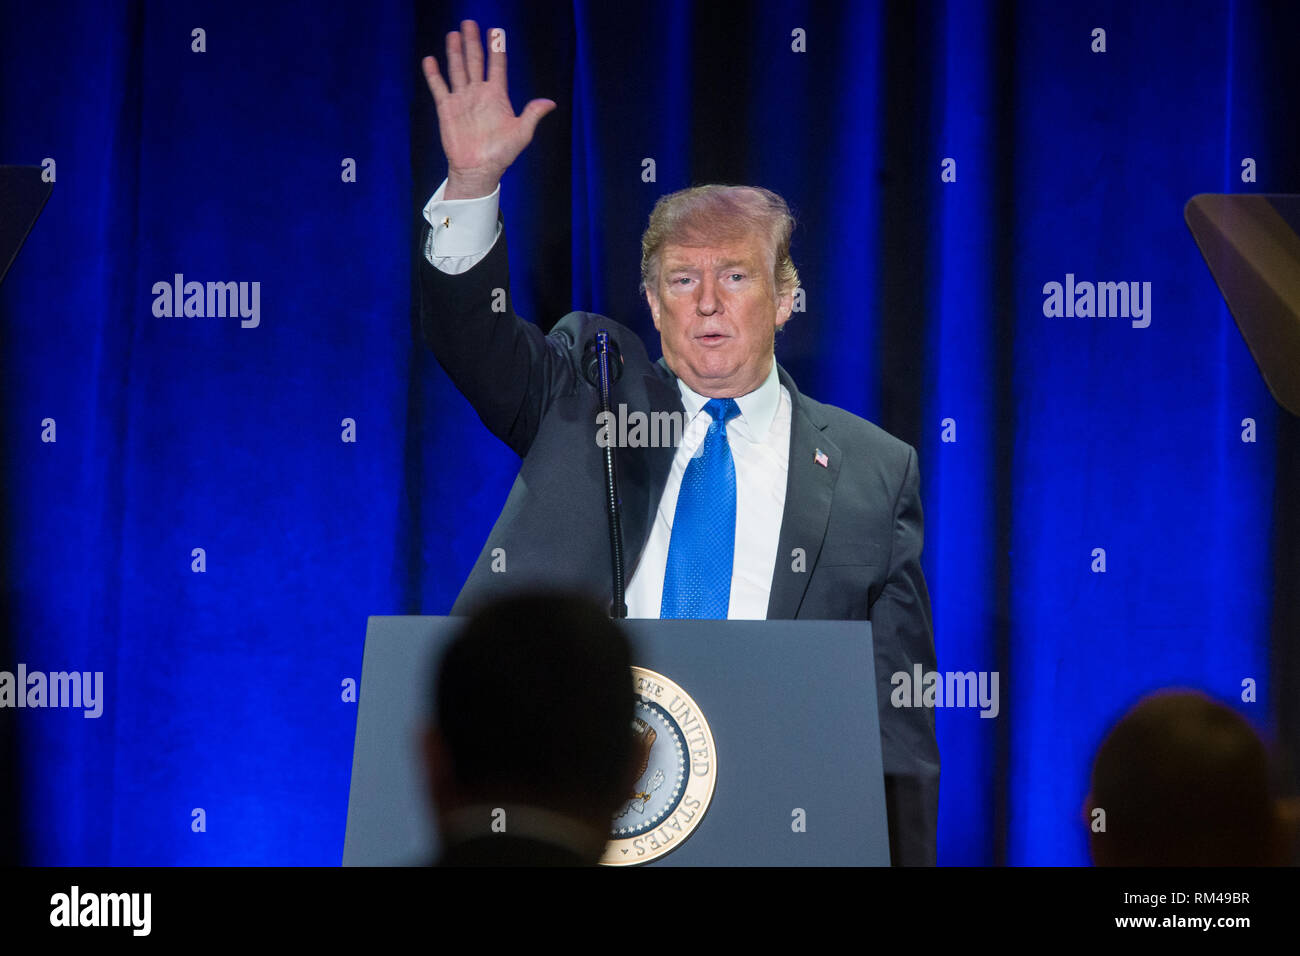 US President Donald J. Trump waves after delivering remarks at the Major County Sheriffs and Major Cities Chiefs Association Joint Conference, in Washington, DC, USA, 13 February 2019. Trump took the opportunity to deliver remarks on his border-security and immigration policy. Republican leaders are asking Trump to sign legislation that allocates about 1.375 billion USD (1.218 billion euros) for over fifty miles of physical barriers along the border. Signing the agreement would prevent another partial shutdown of the federal government that would begin 16 February. Credit: Michael Reynolds/P Stock Photo